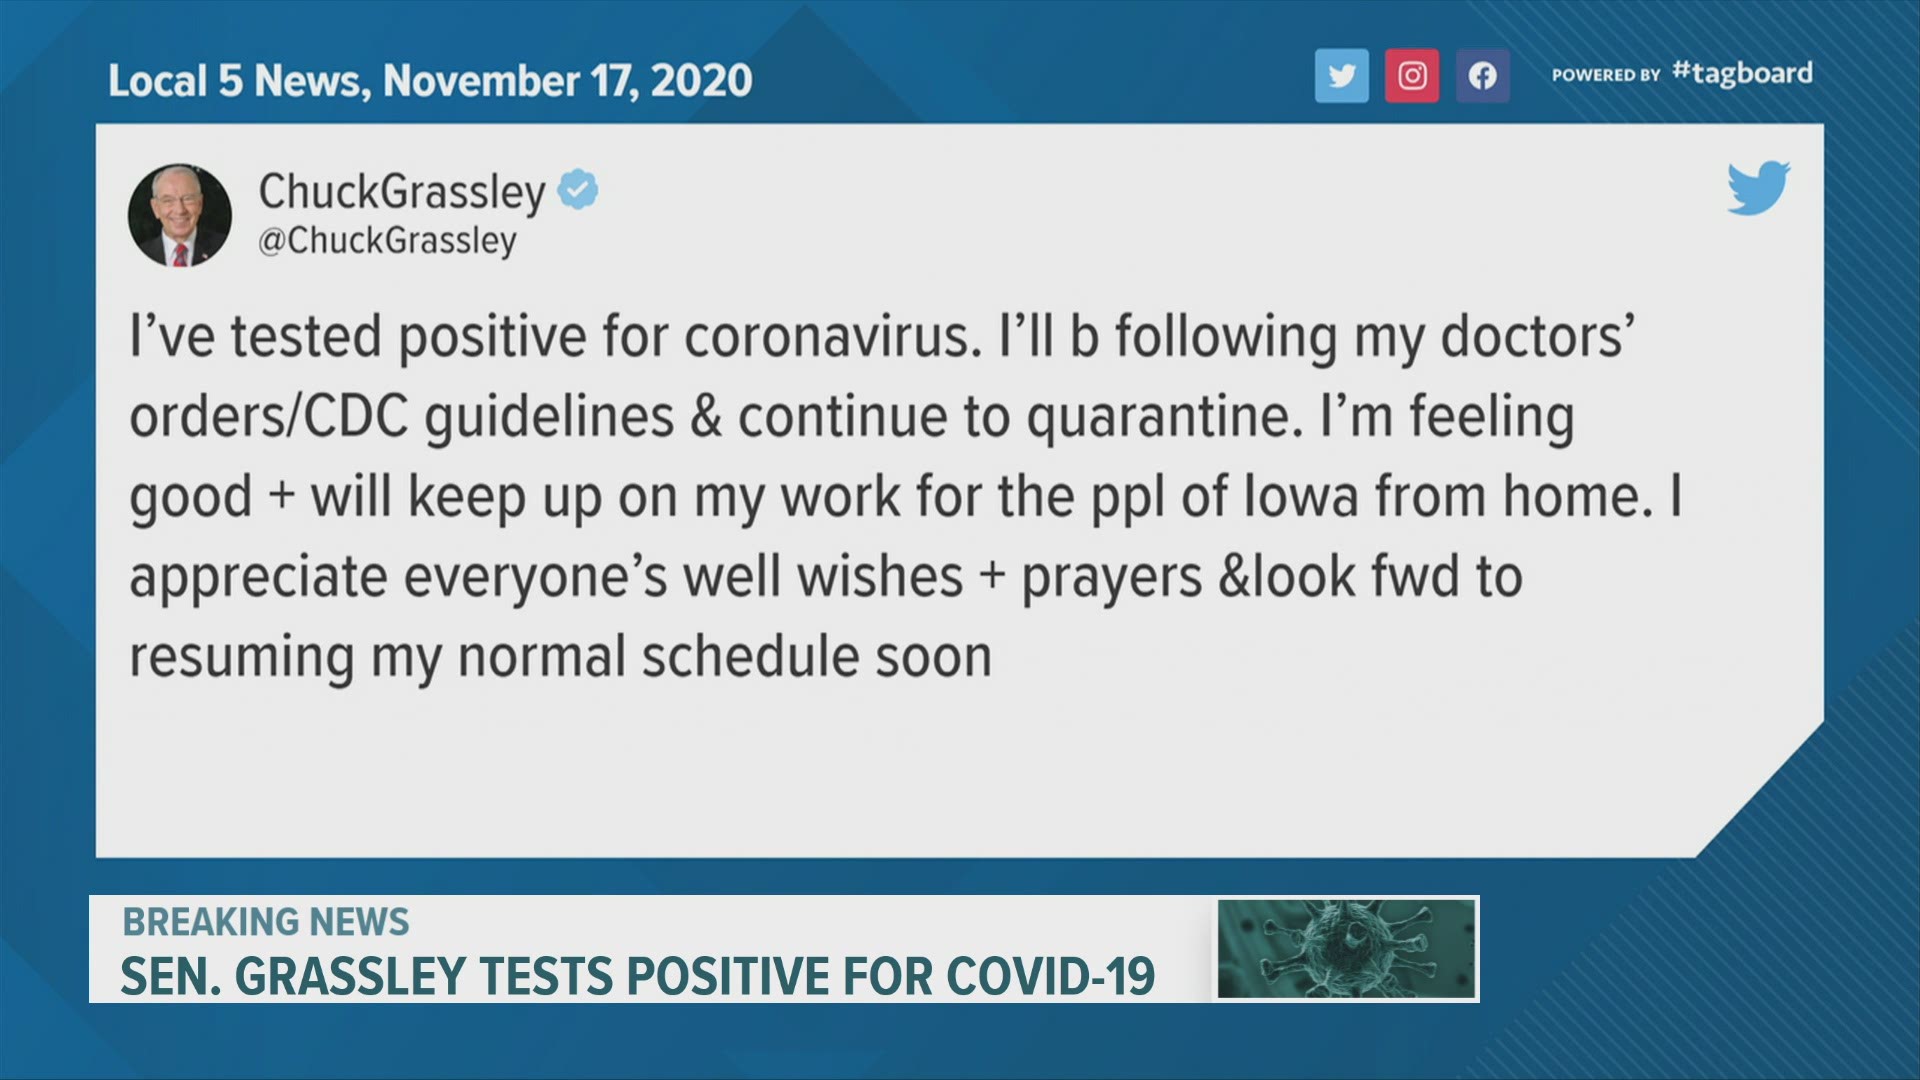 Sen. Chuck Grassley tweeted he tested positive for the coronavirus today. He was already in quarantine this morning after being exposed to the virus.